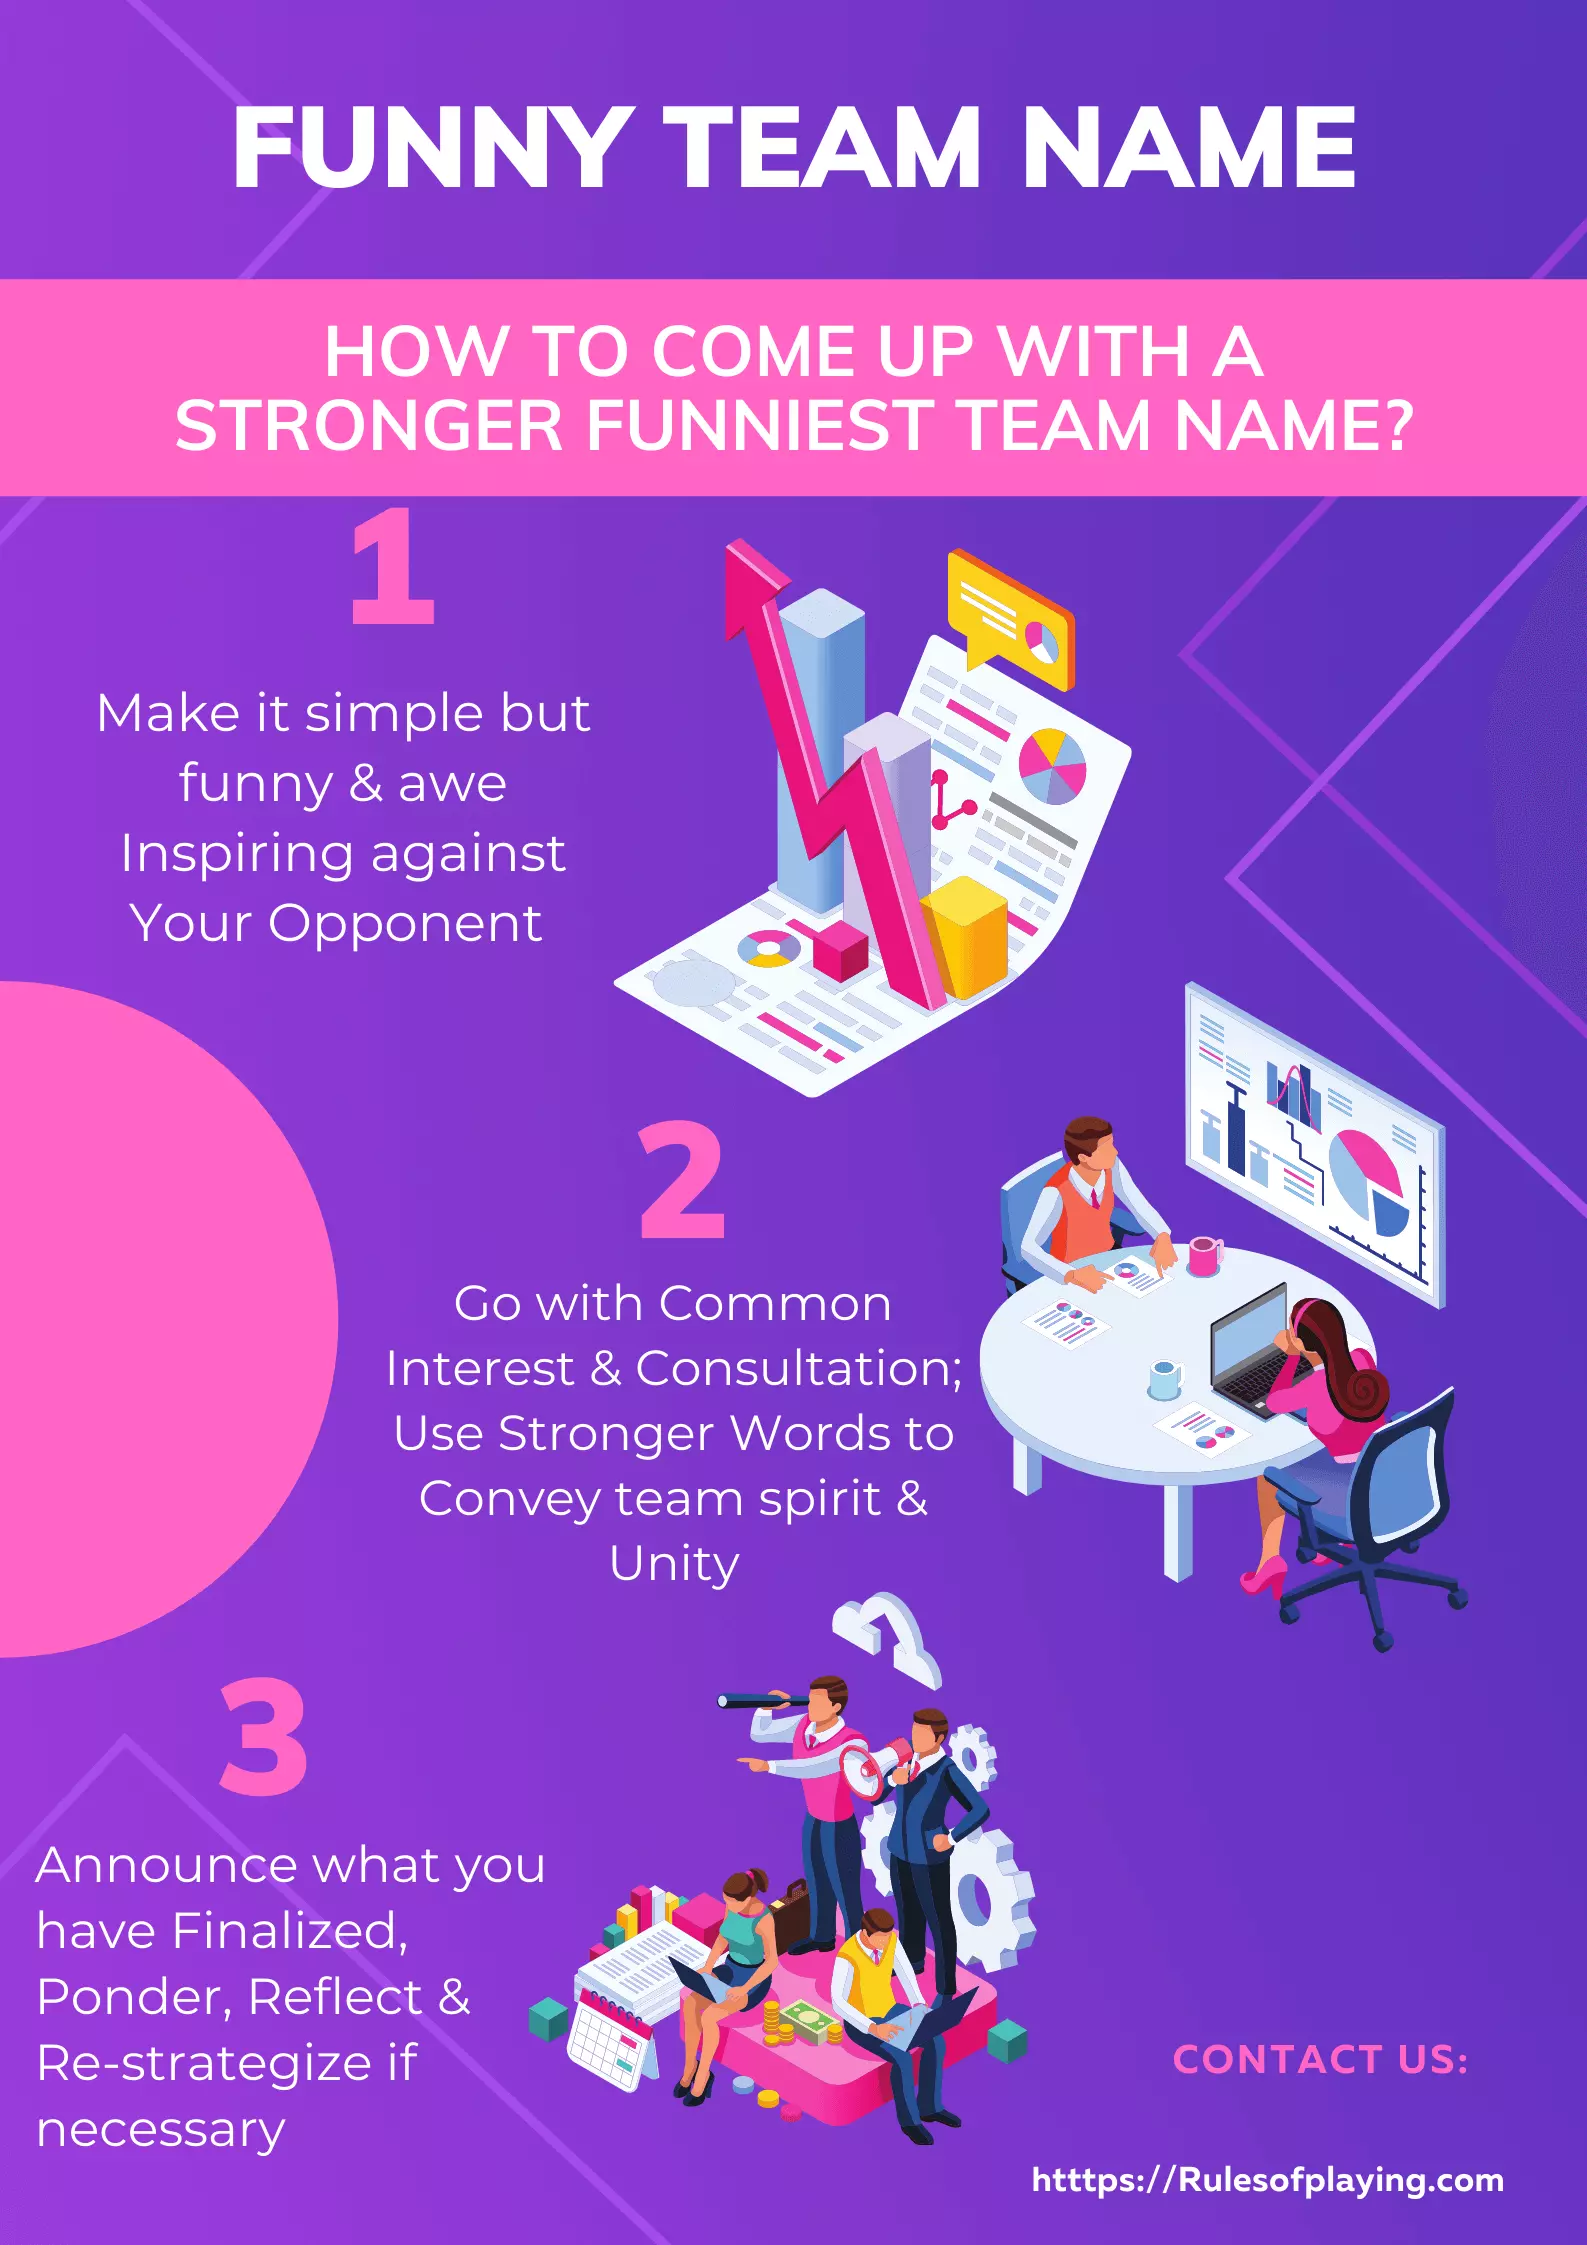 500+ Funny Team Names For Your Squad - Rules of Playing